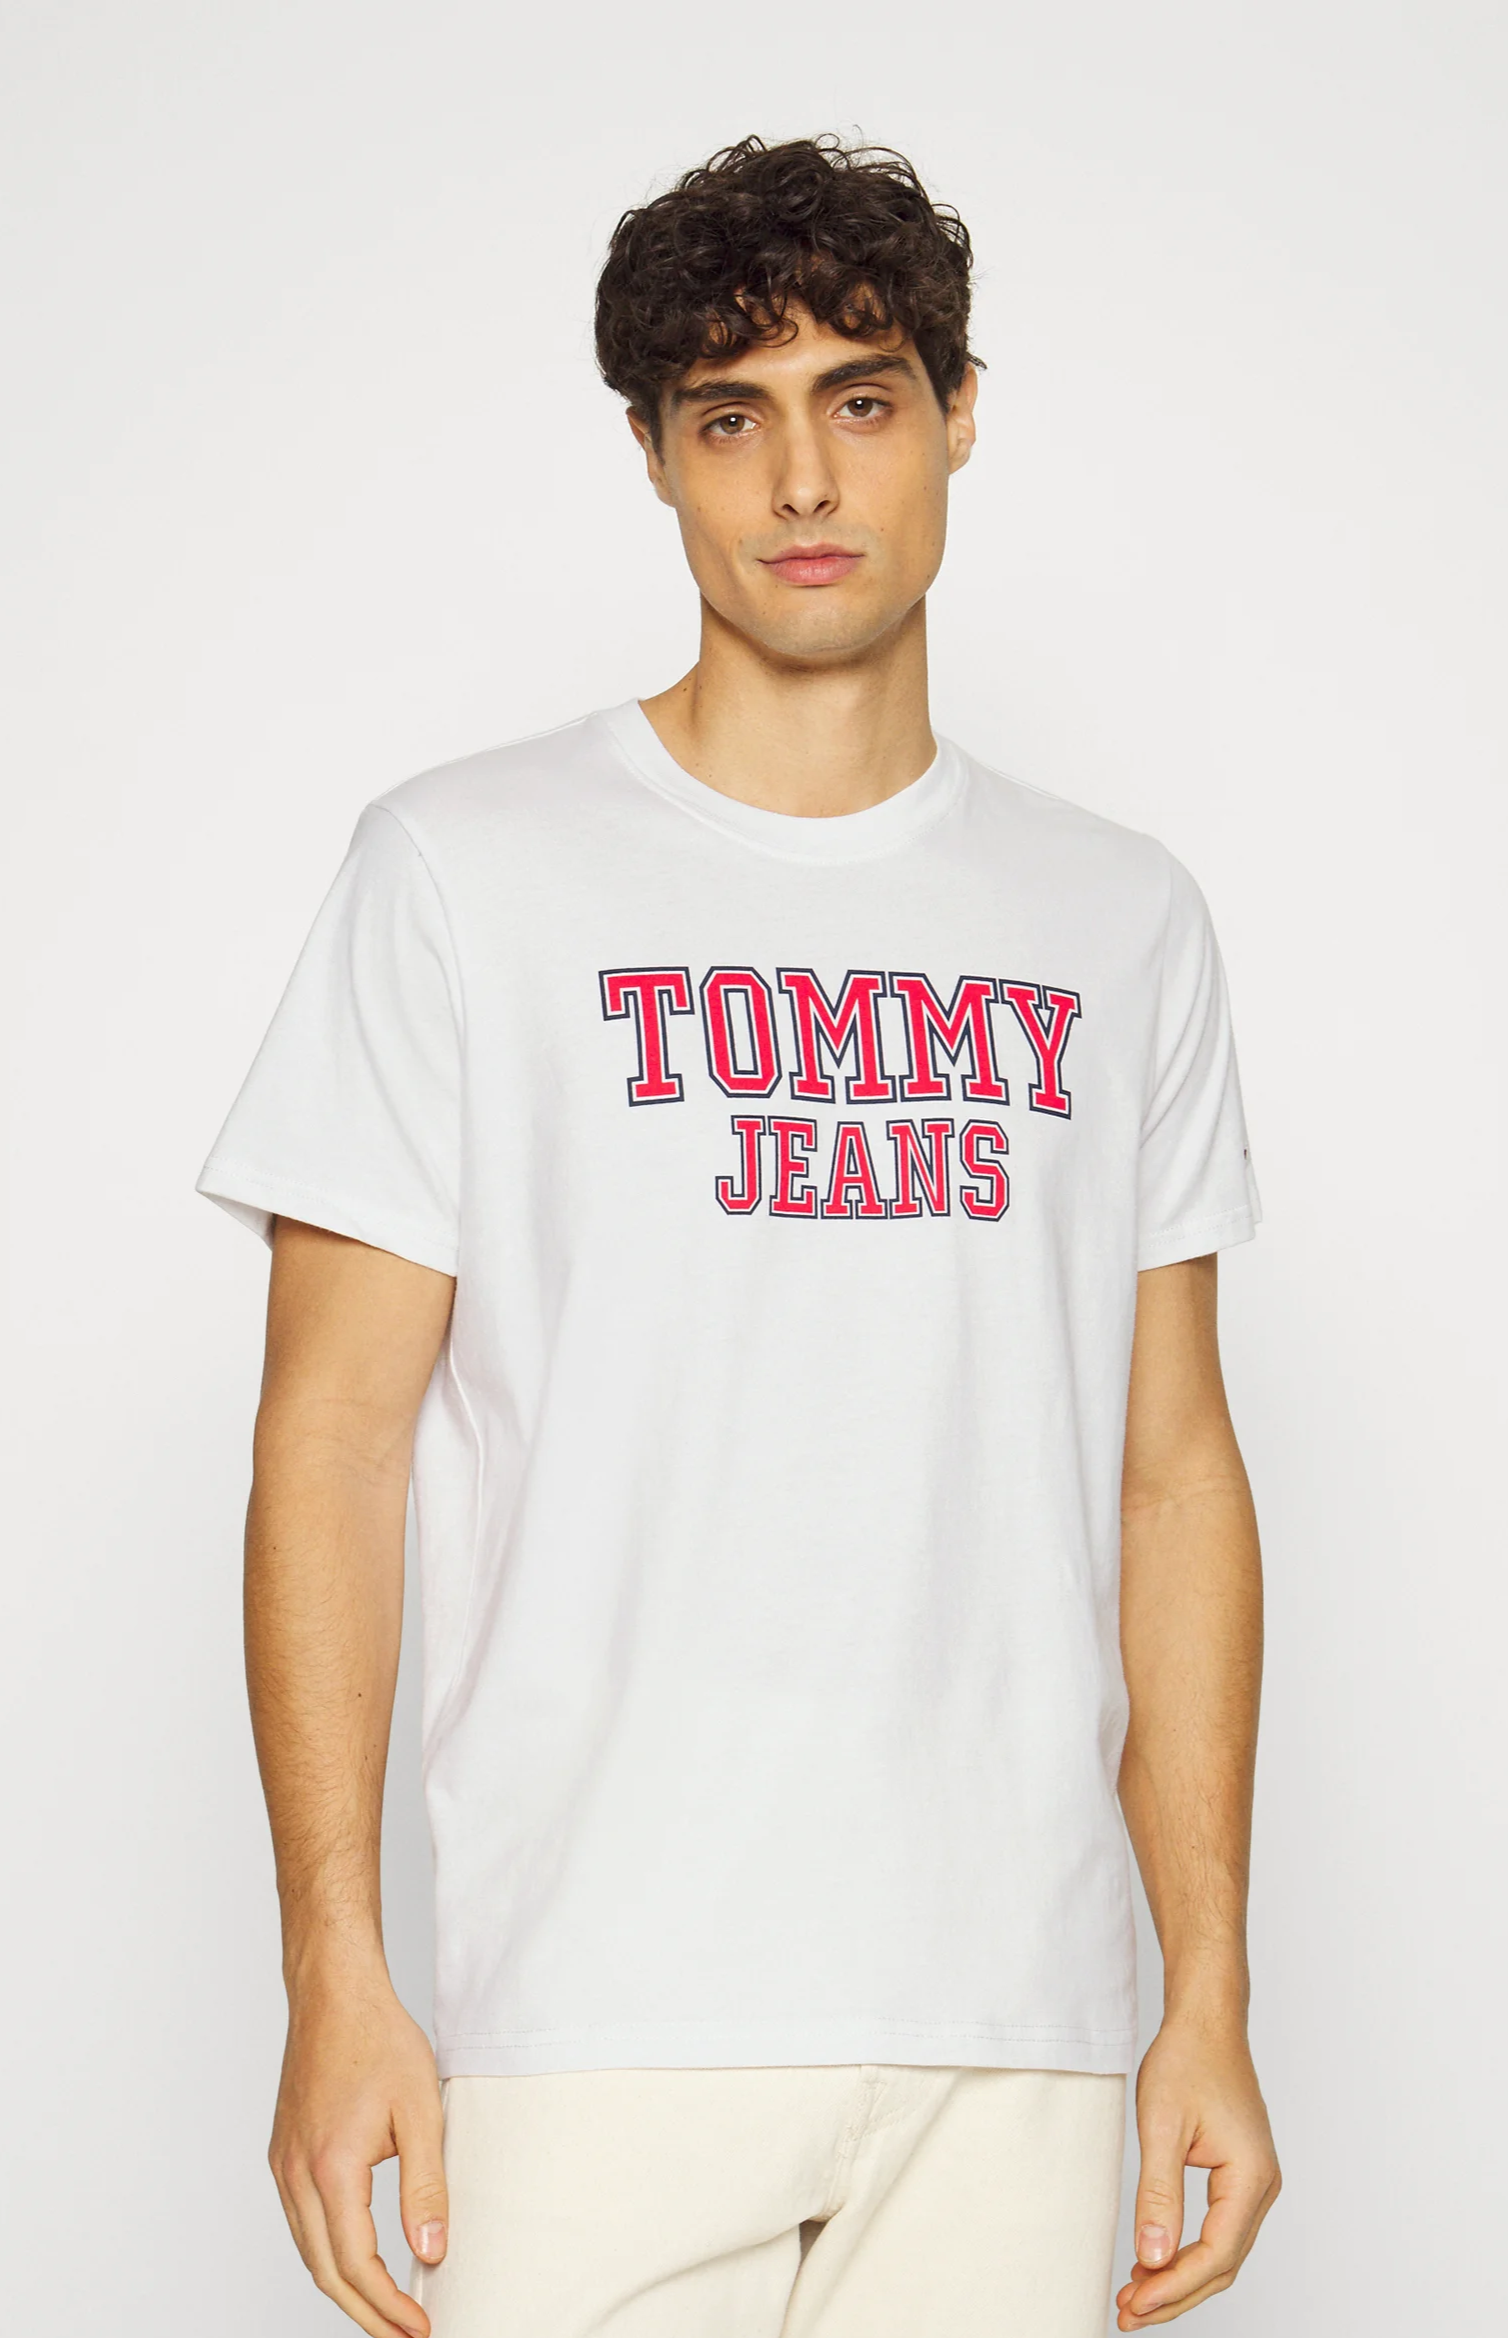 CAMISETA TOMMY JEANS PARA CABALLERO - tommycolombia